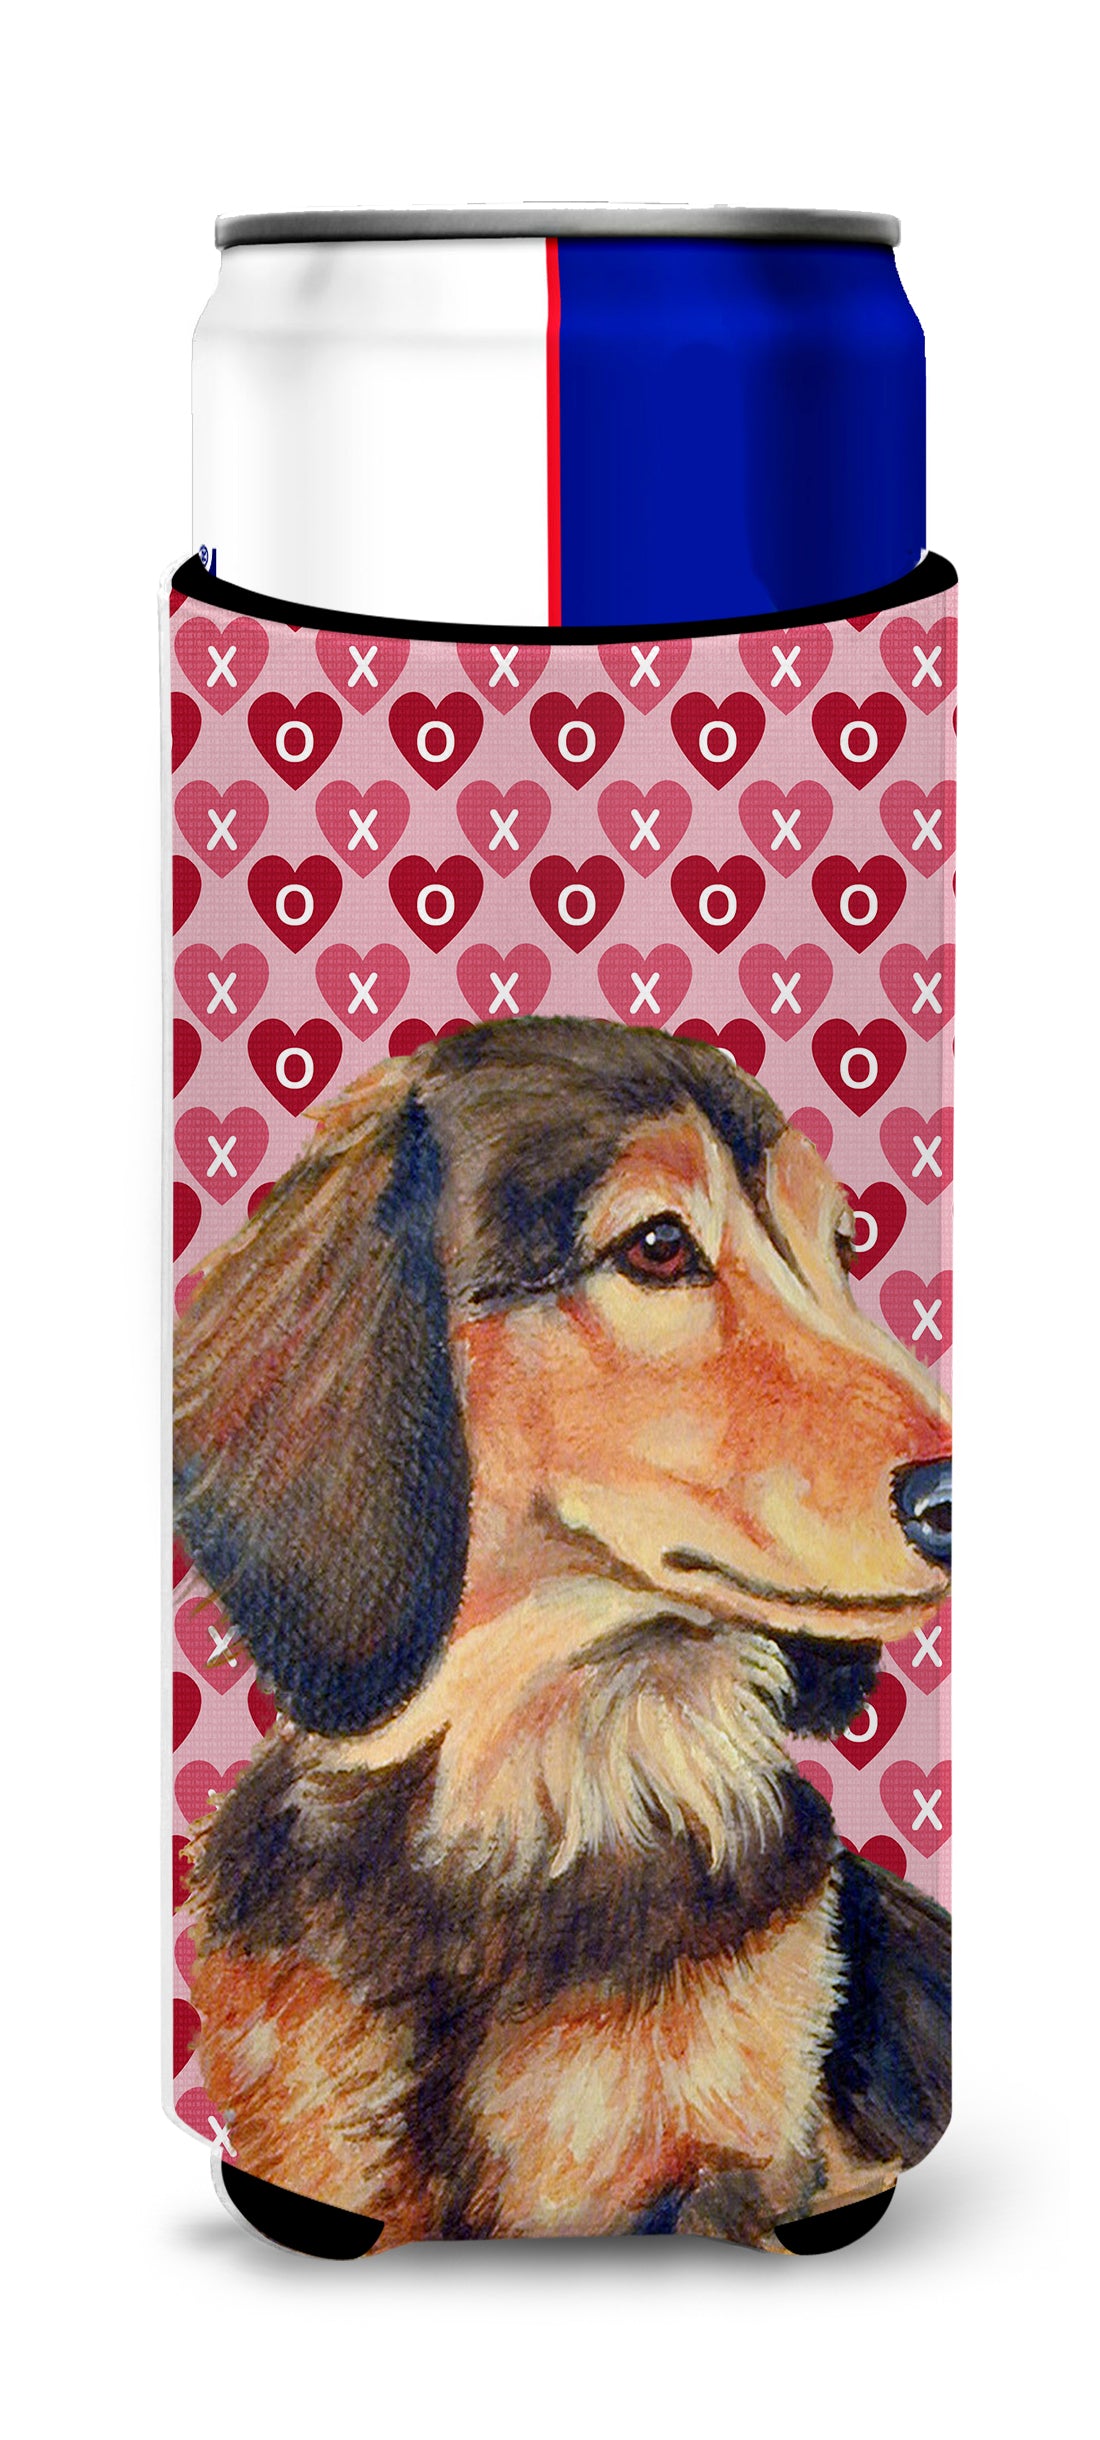 Dachshund Hearts Love and Valentine's Day Portrait Ultra Beverage Insulators for slim cans LH9166MUK.